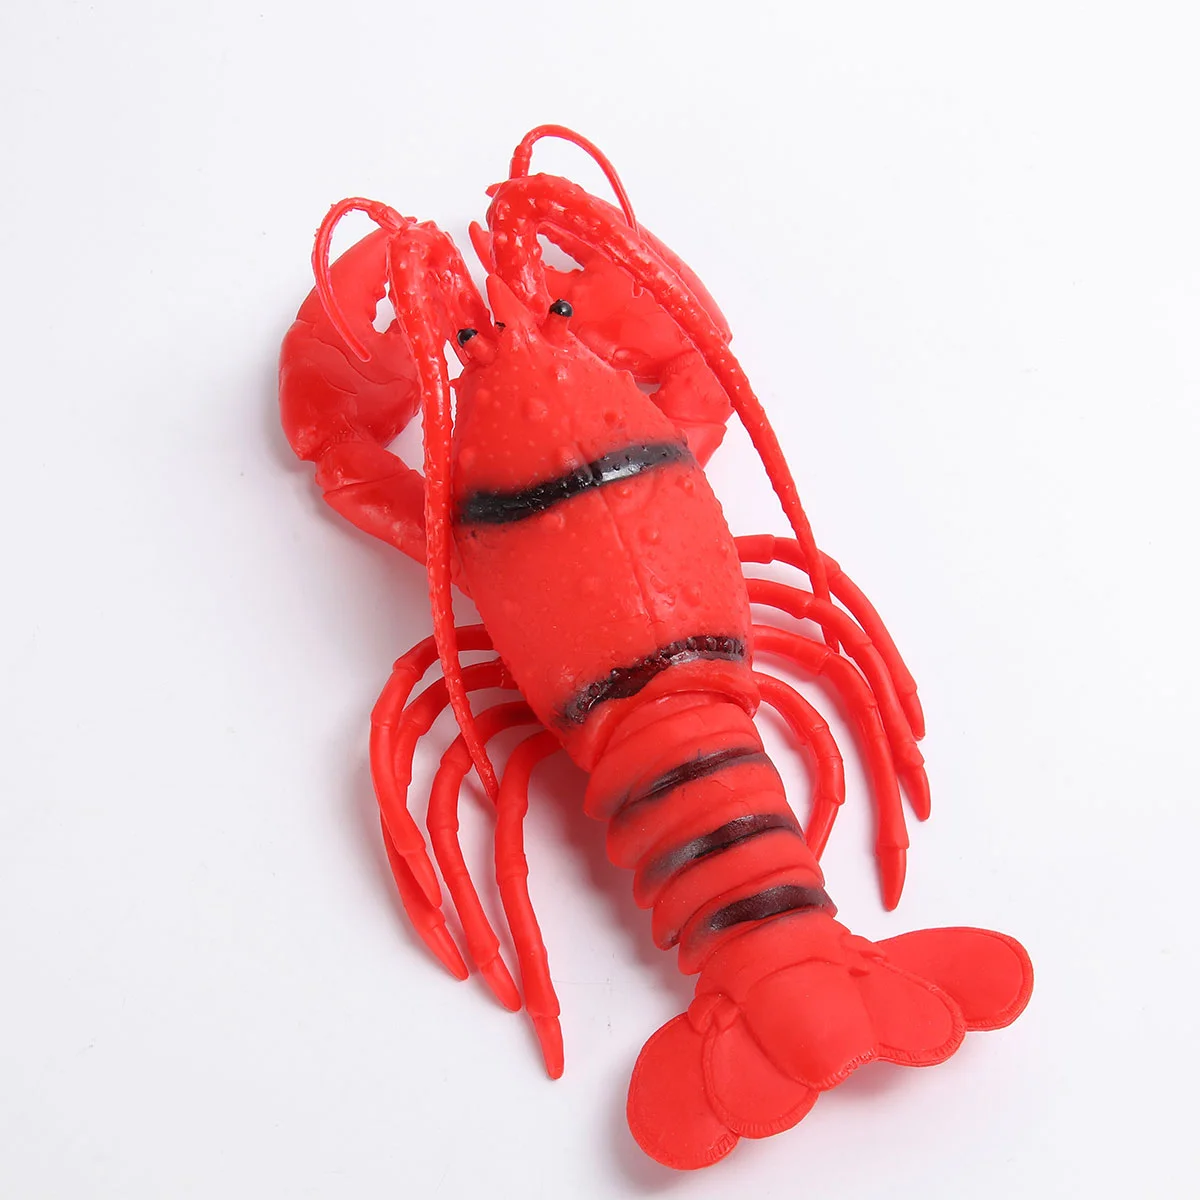 

Lobster Lifelike Artificial Figurines Educational Toys for Children Lobster Animals Model for Aquarium Ornament